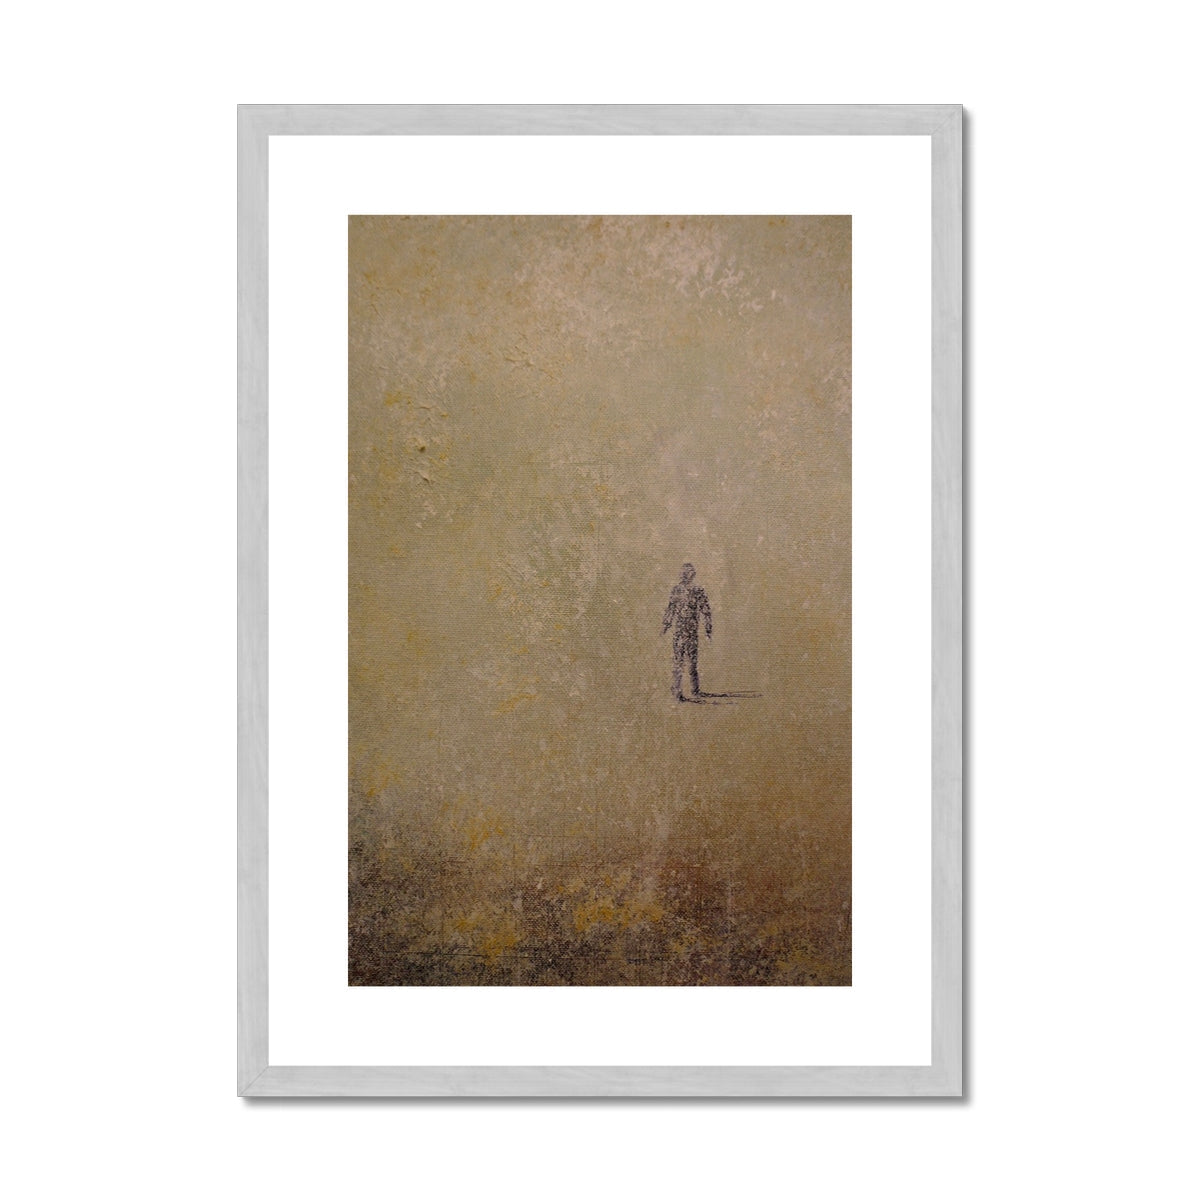 Into The Munro Mist Painting | Antique Framed & Mounted Prints From Scotland-Antique Framed & Mounted Prints-Abstract & Impressionistic Art Gallery-A2 Portrait-Silver Frame-Paintings, Prints, Homeware, Art Gifts From Scotland By Scottish Artist Kevin Hunter